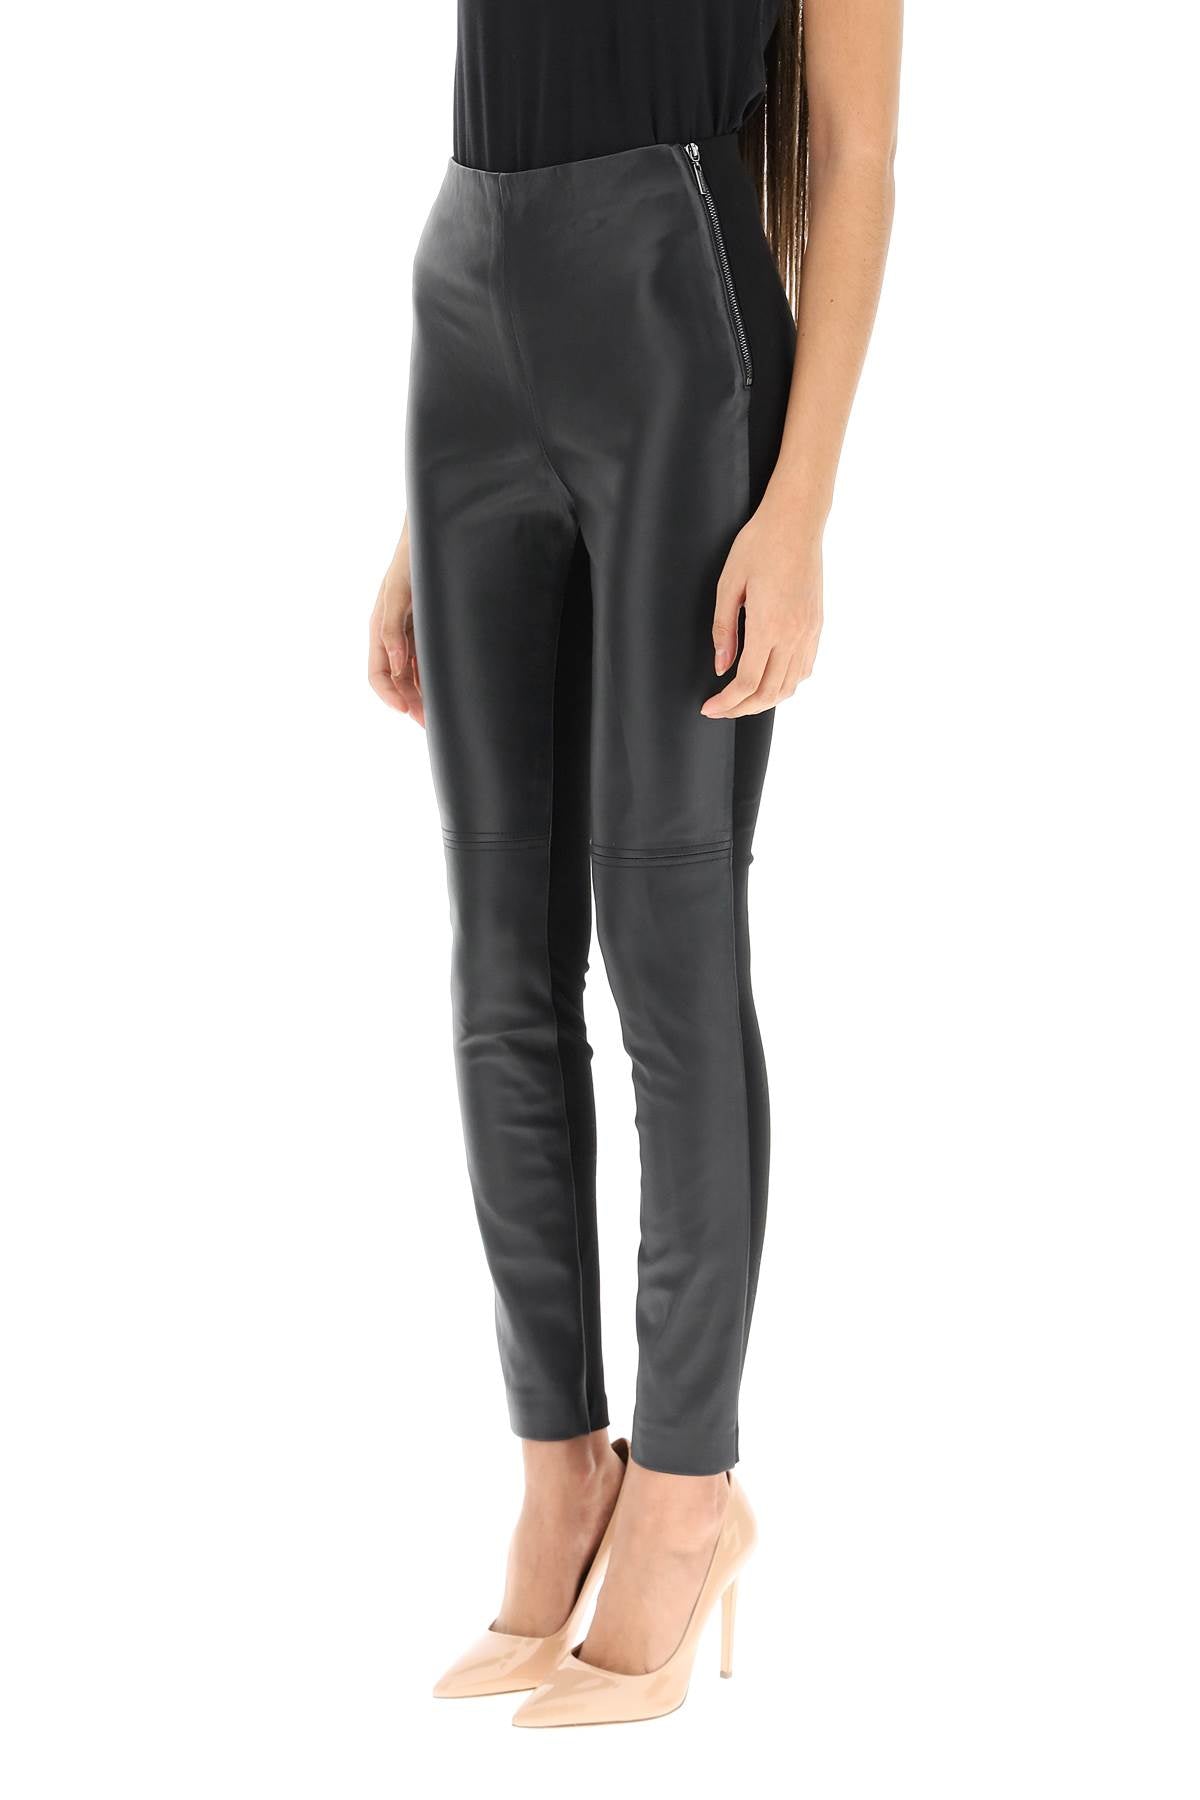 Marciano by guess leather and jersey leggings-3